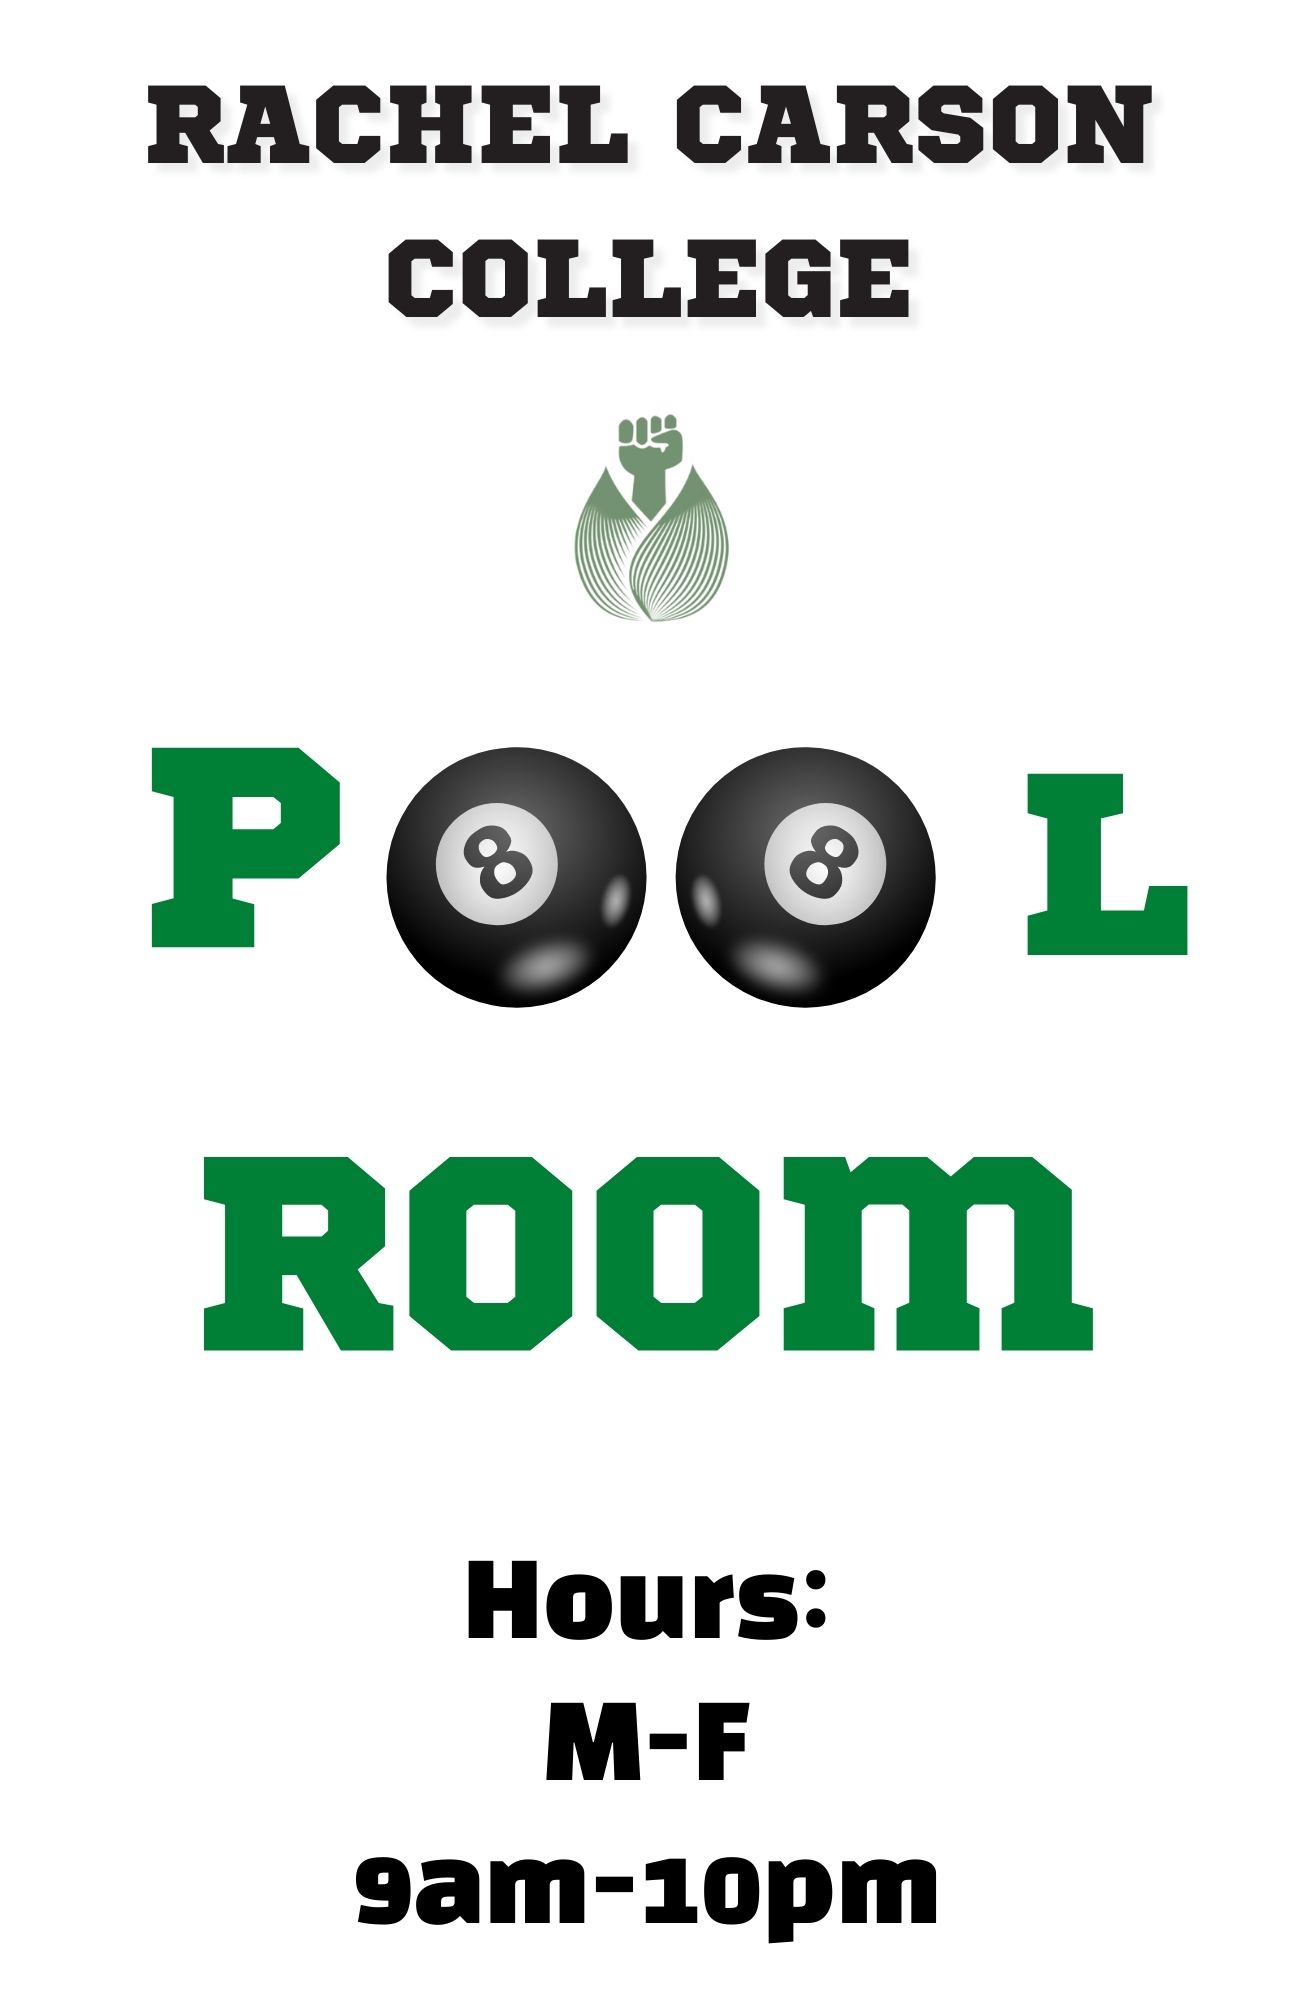 Rachel Carson College's Pool Room open Monday through Friday from 9 a m to 10 p m. 